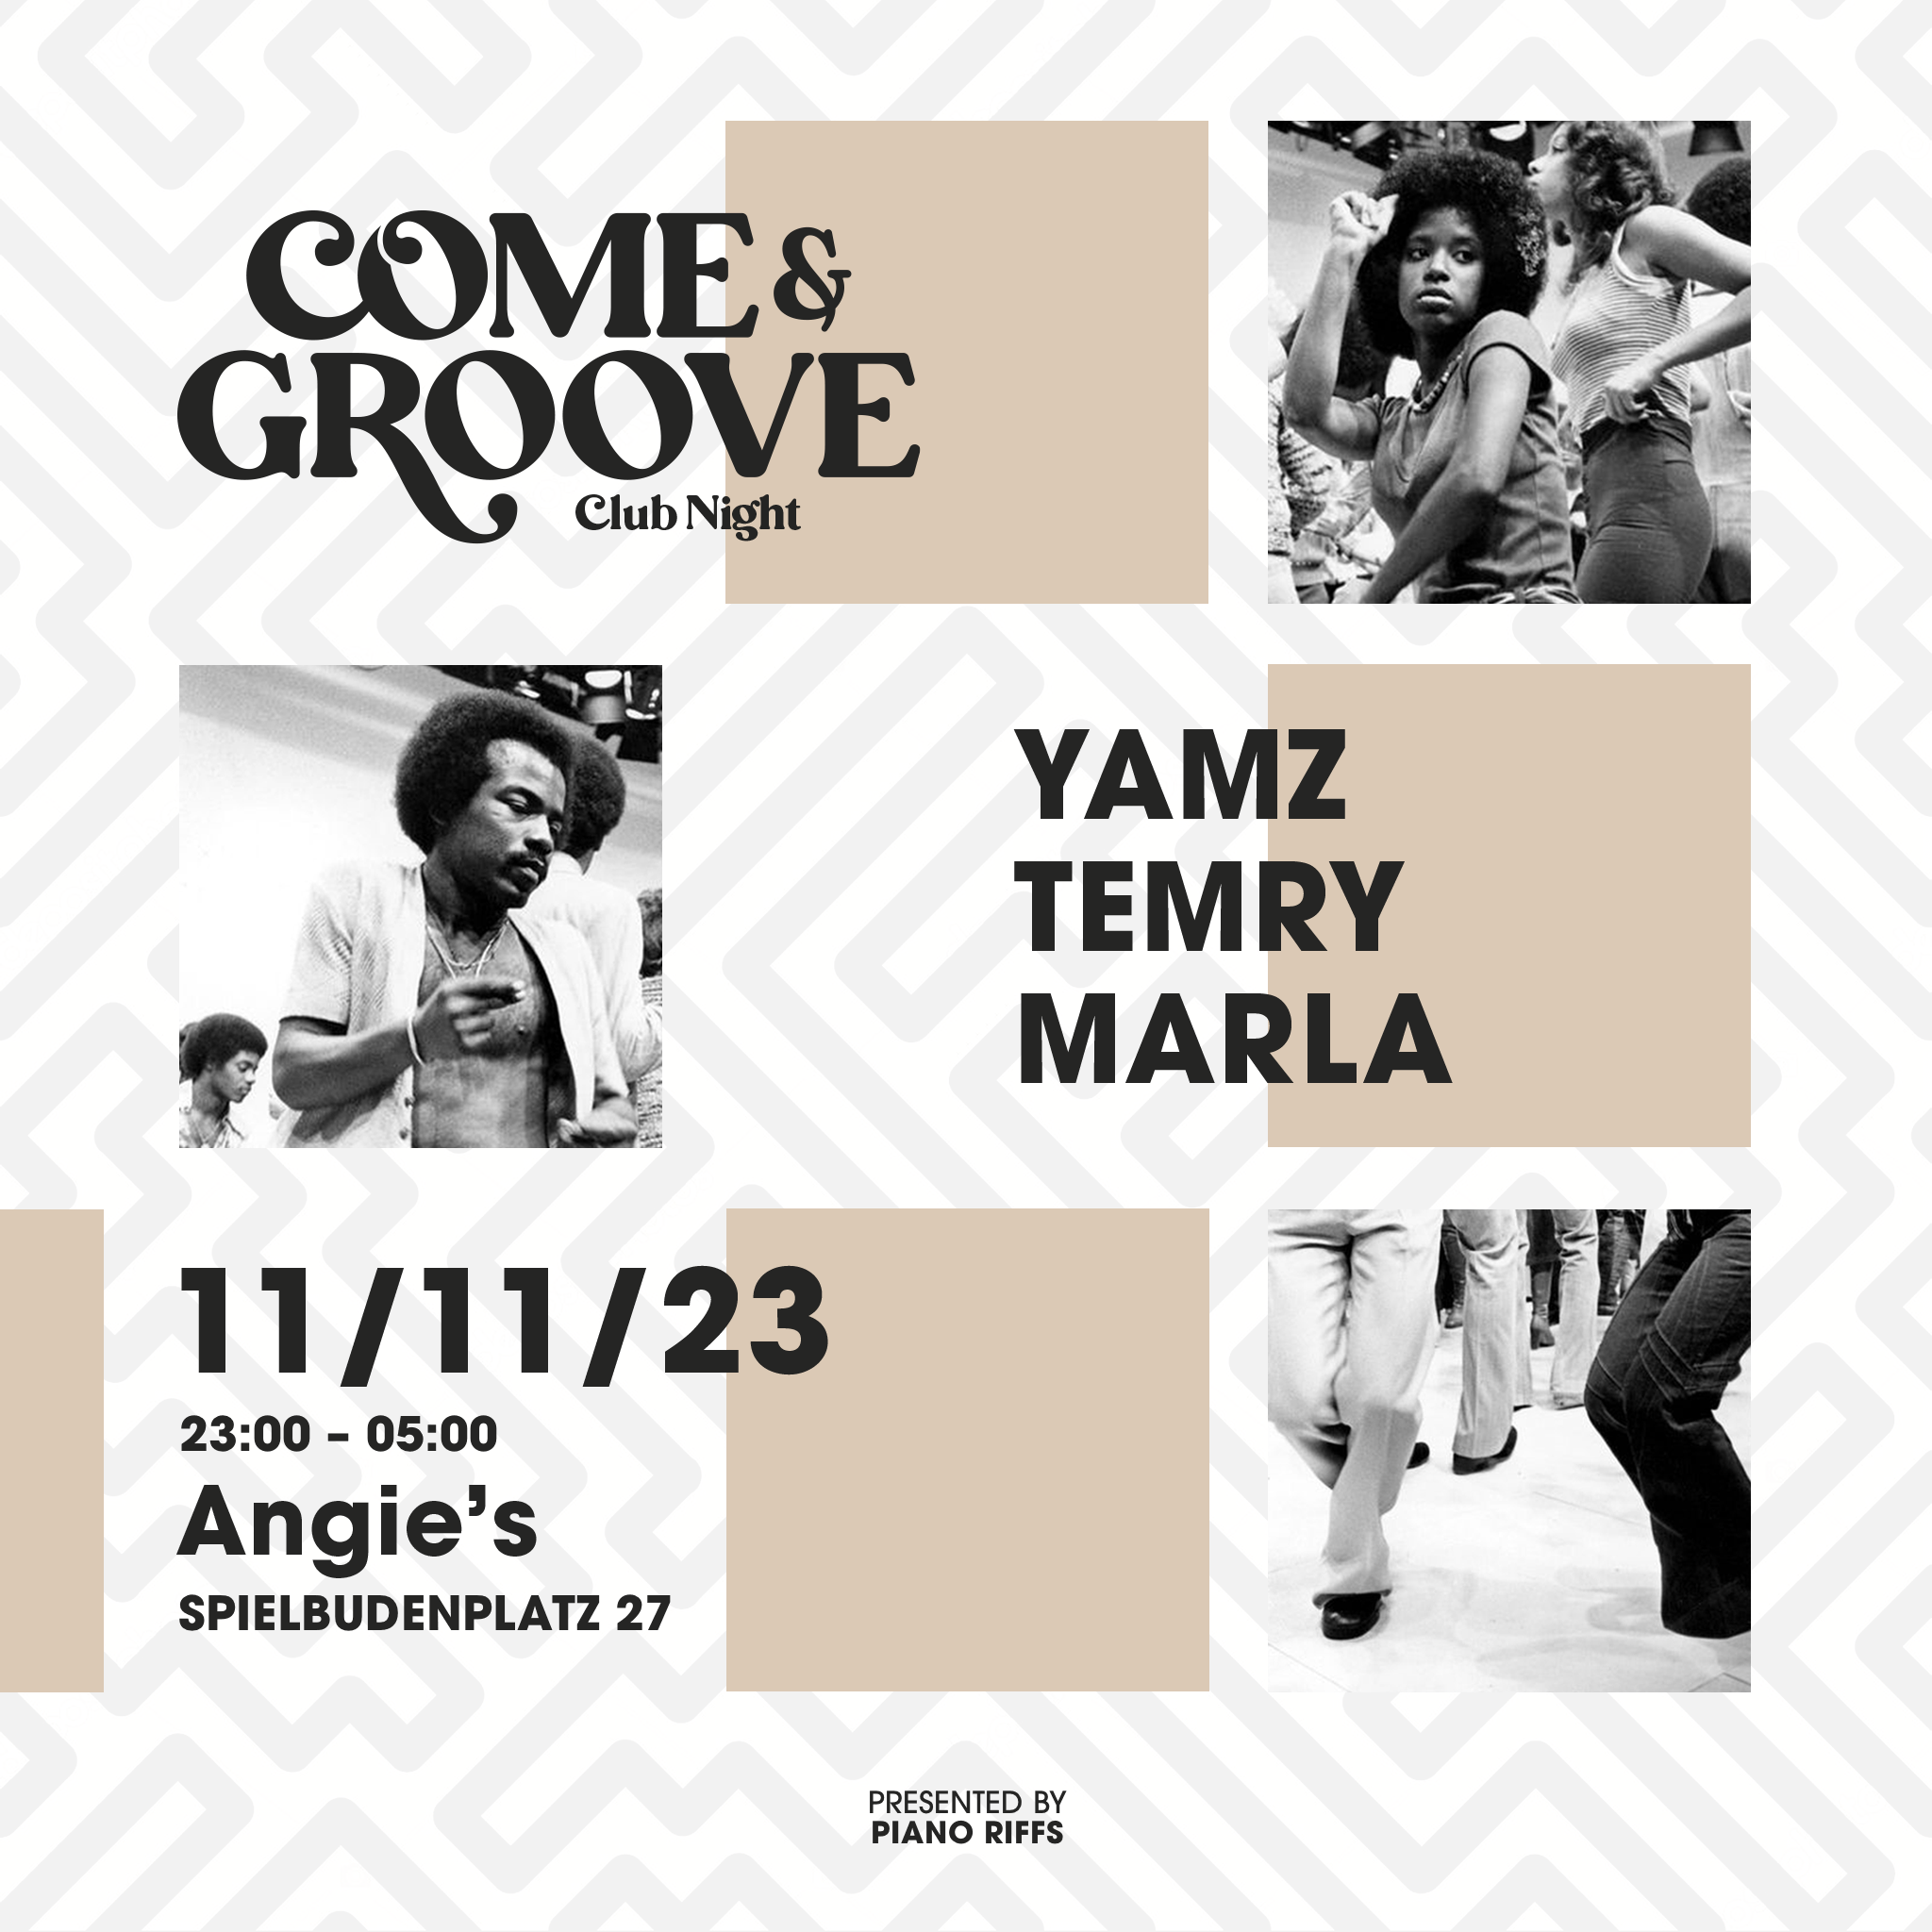 Come & Groove 'Club Night' - フライヤー表